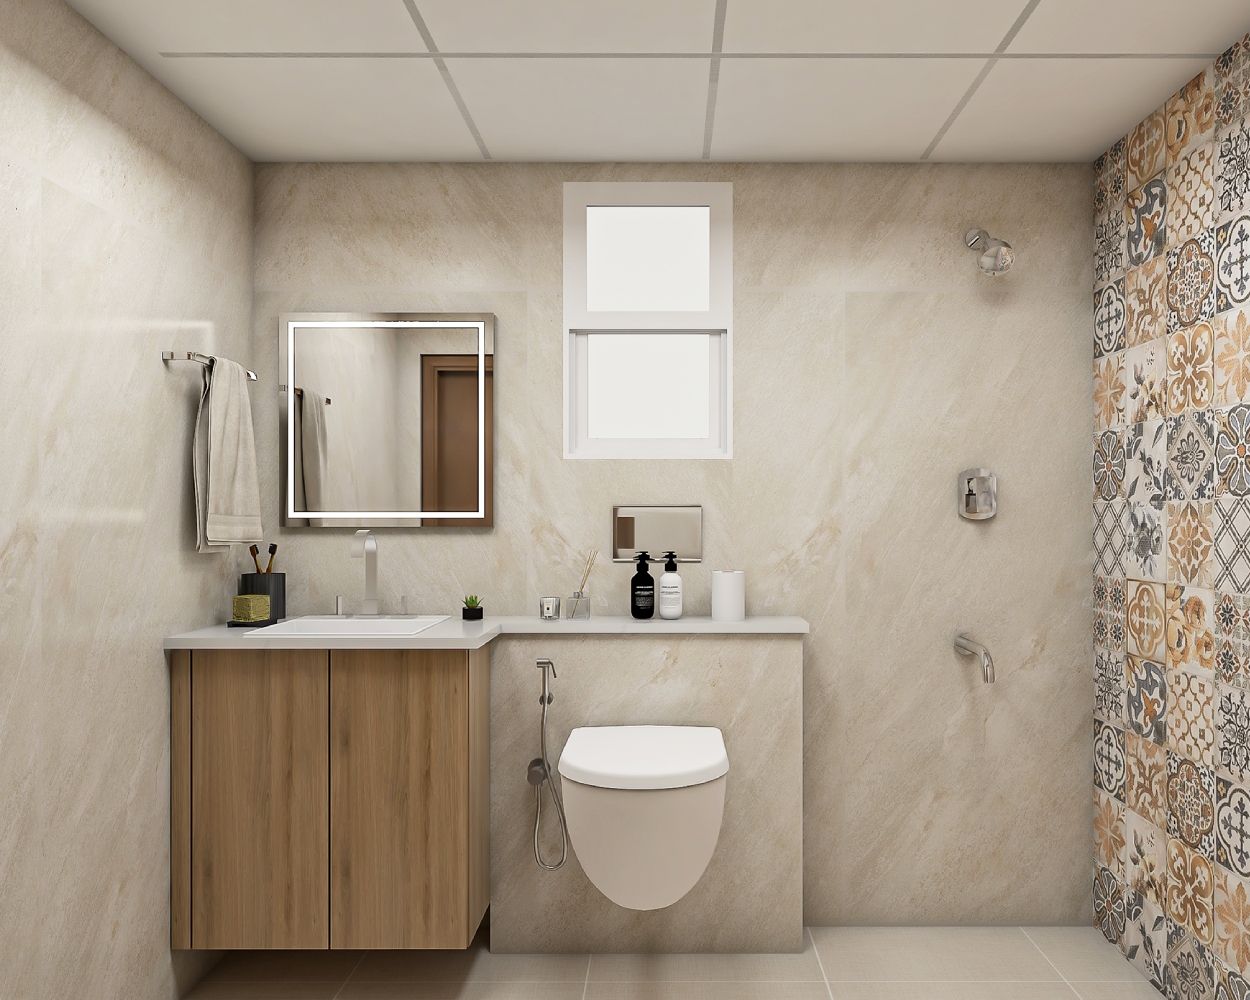 Modern Bathroom Design With Wooden Bathroom Cabinet And Moroccan Accent Wall